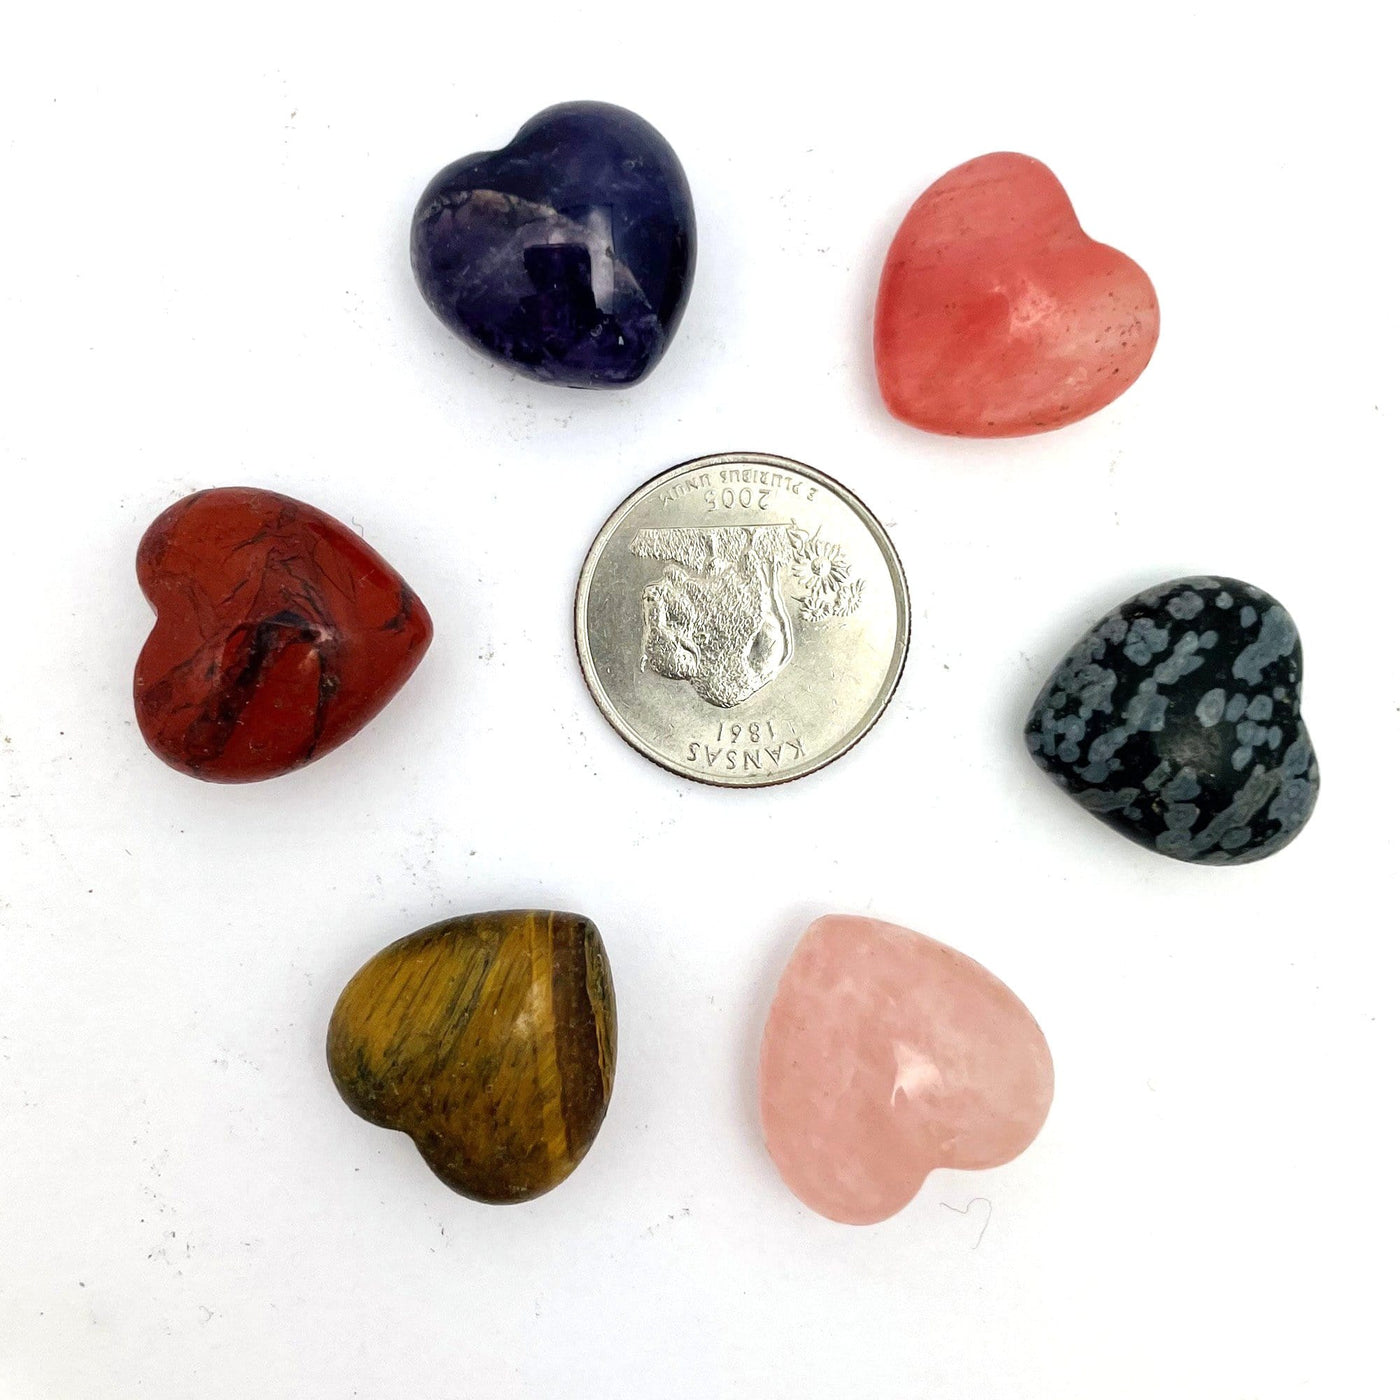 Stone hearts in all the available sgtones, tigers eye, red jasper, amethyst, strawberry quartz, rose quartz, snowflake obsidian around a quarter for size reference